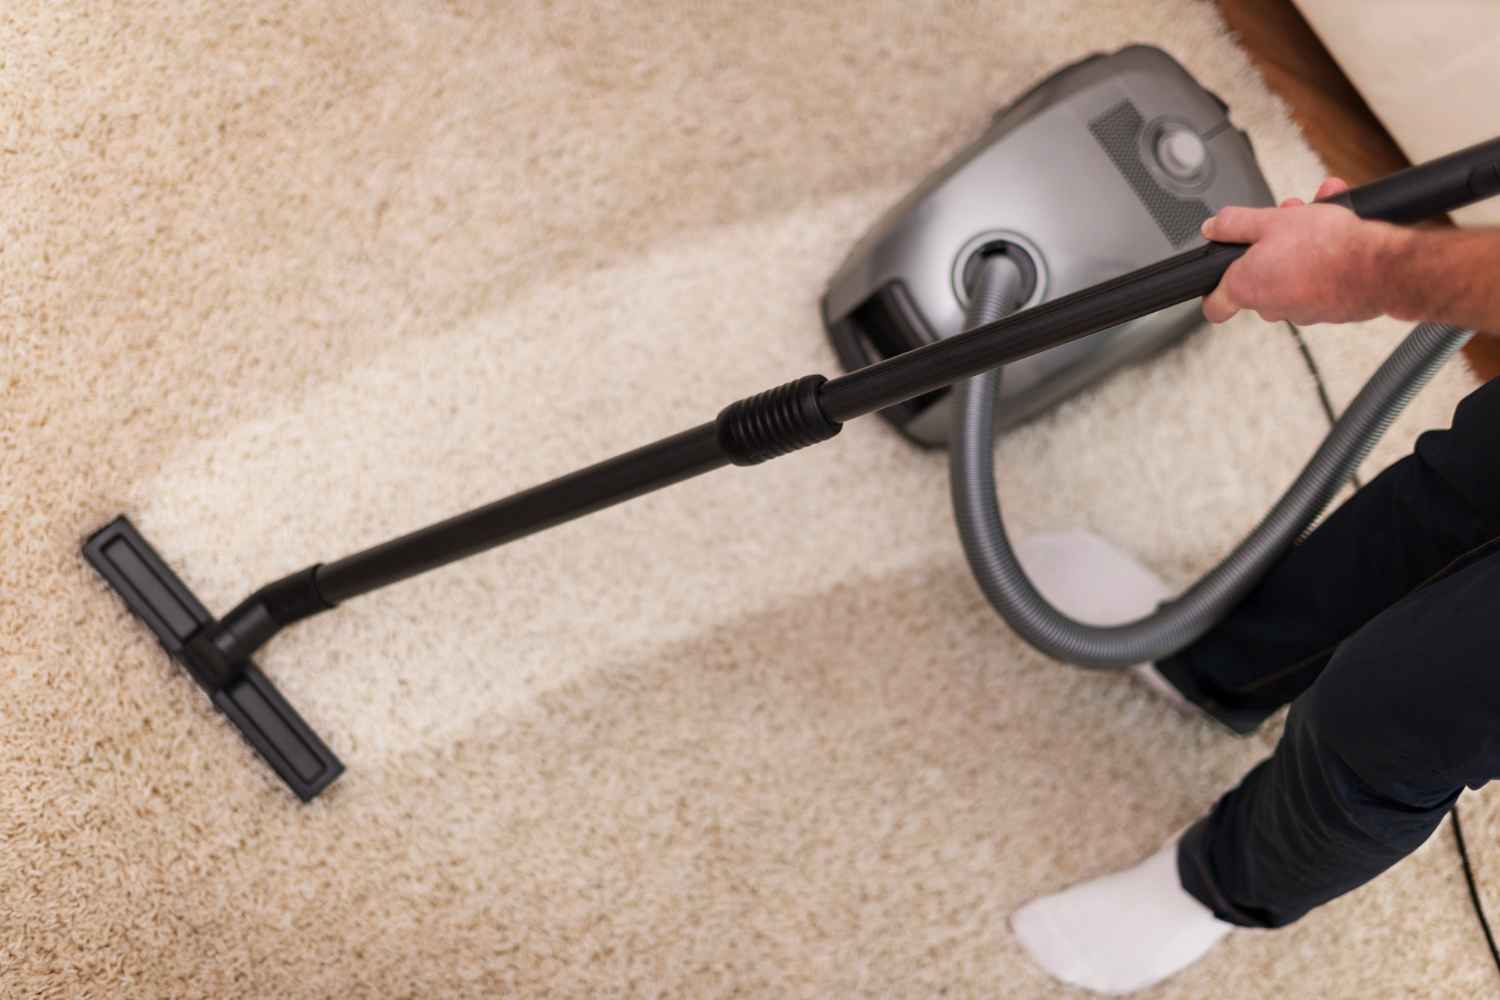 How to Start a Carpet Cleaning Business